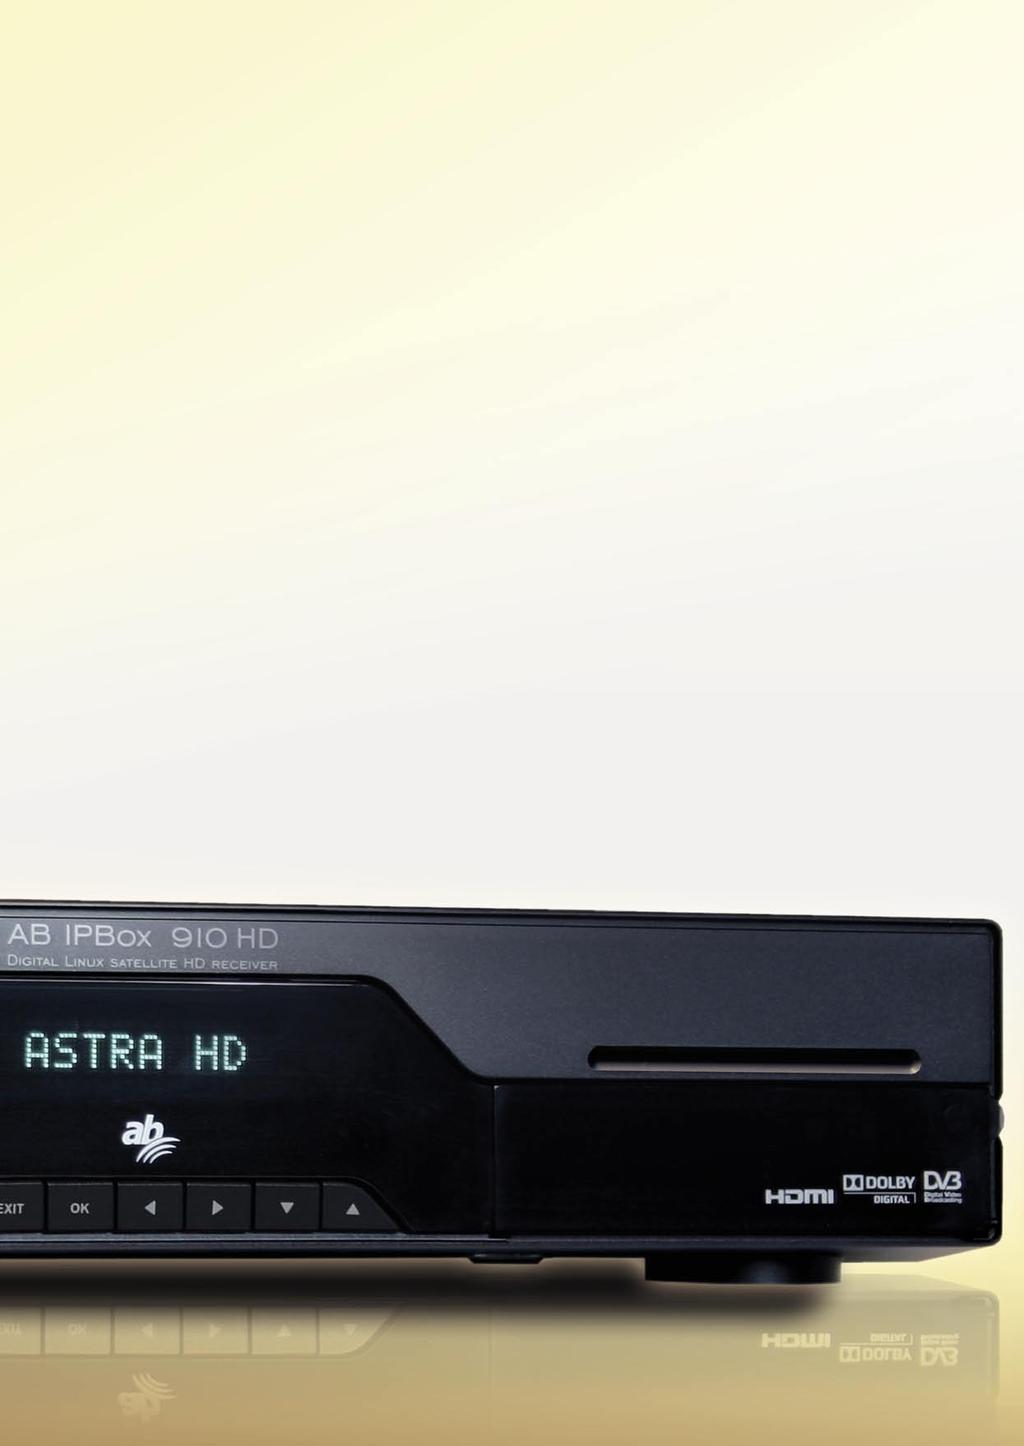 watching soap operas on terrestrial tv, when the analogue broadcasts were shut off? 910HD would help you there too. Replacing DVB-S tuner with DVB-T is a matter of minutes.